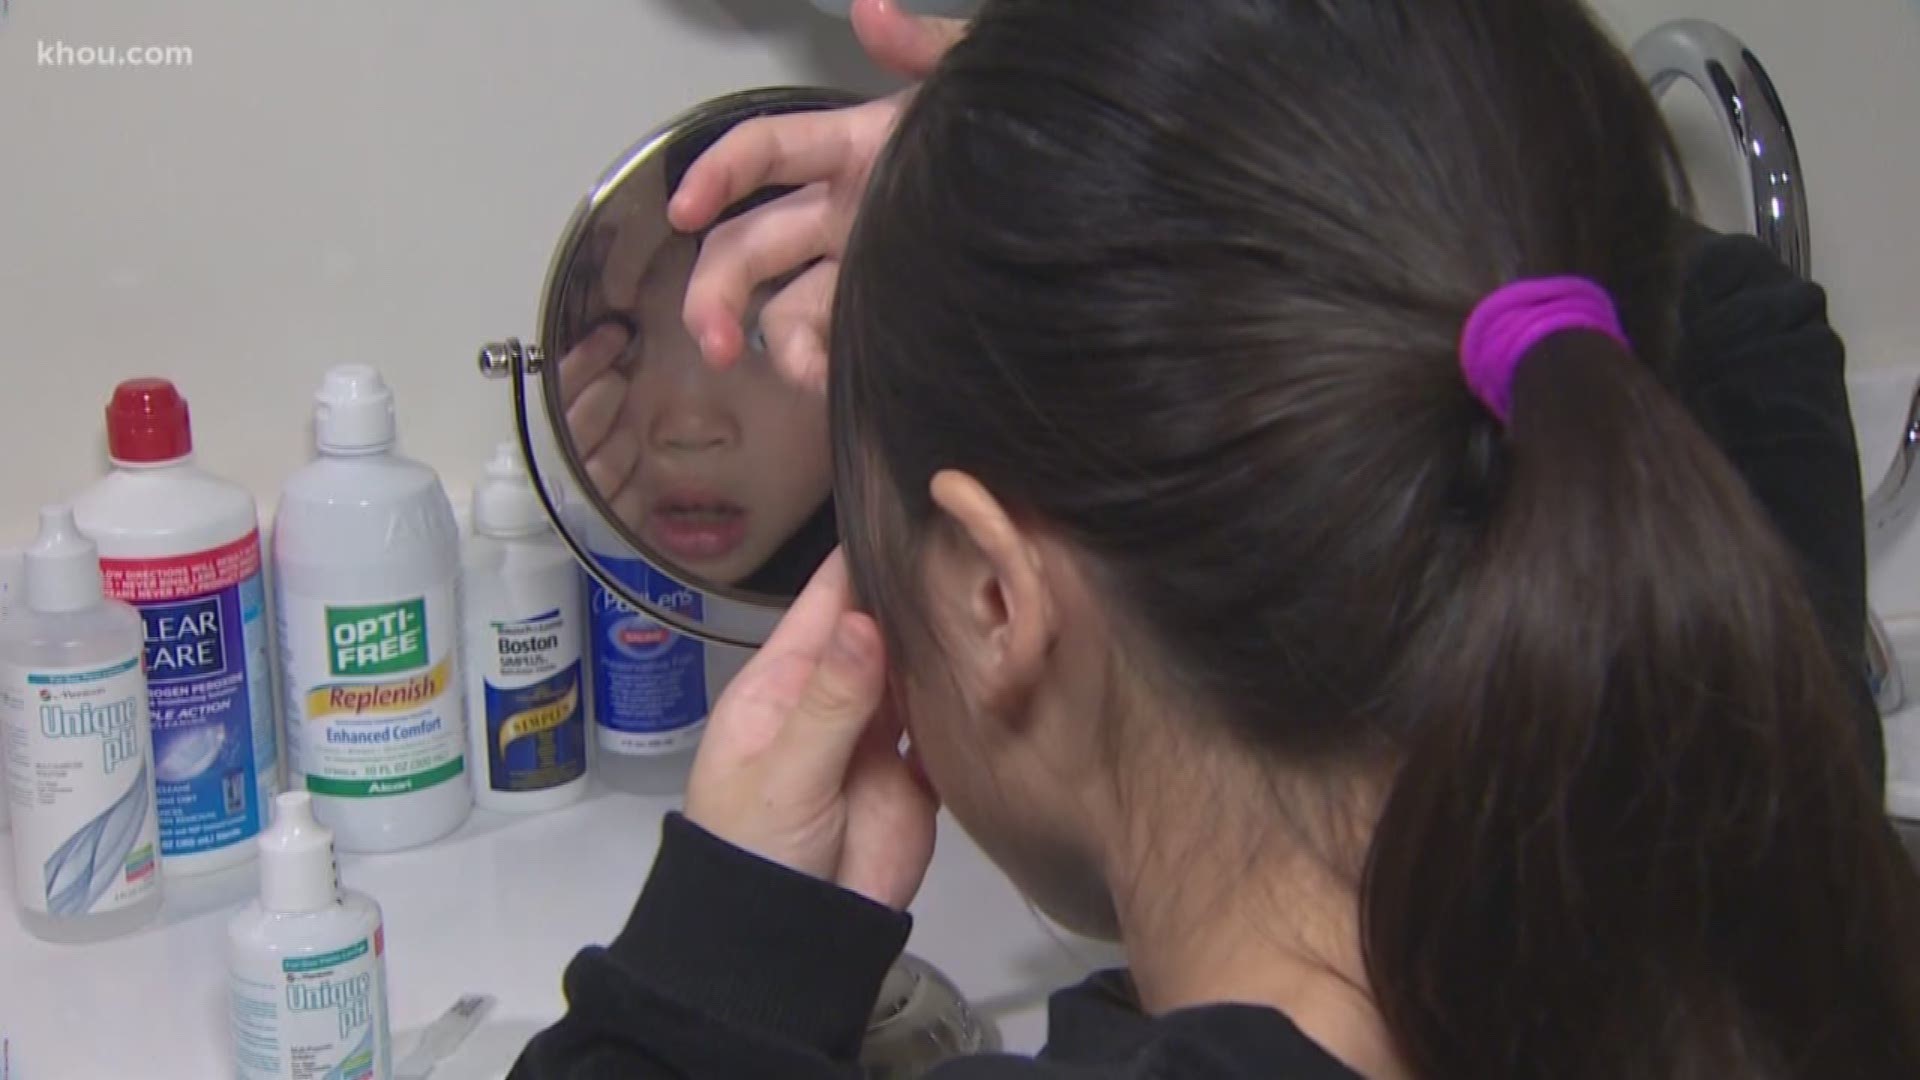 The University of Houston’s Eye Institute is working to correct nearsightedness in a unique way.